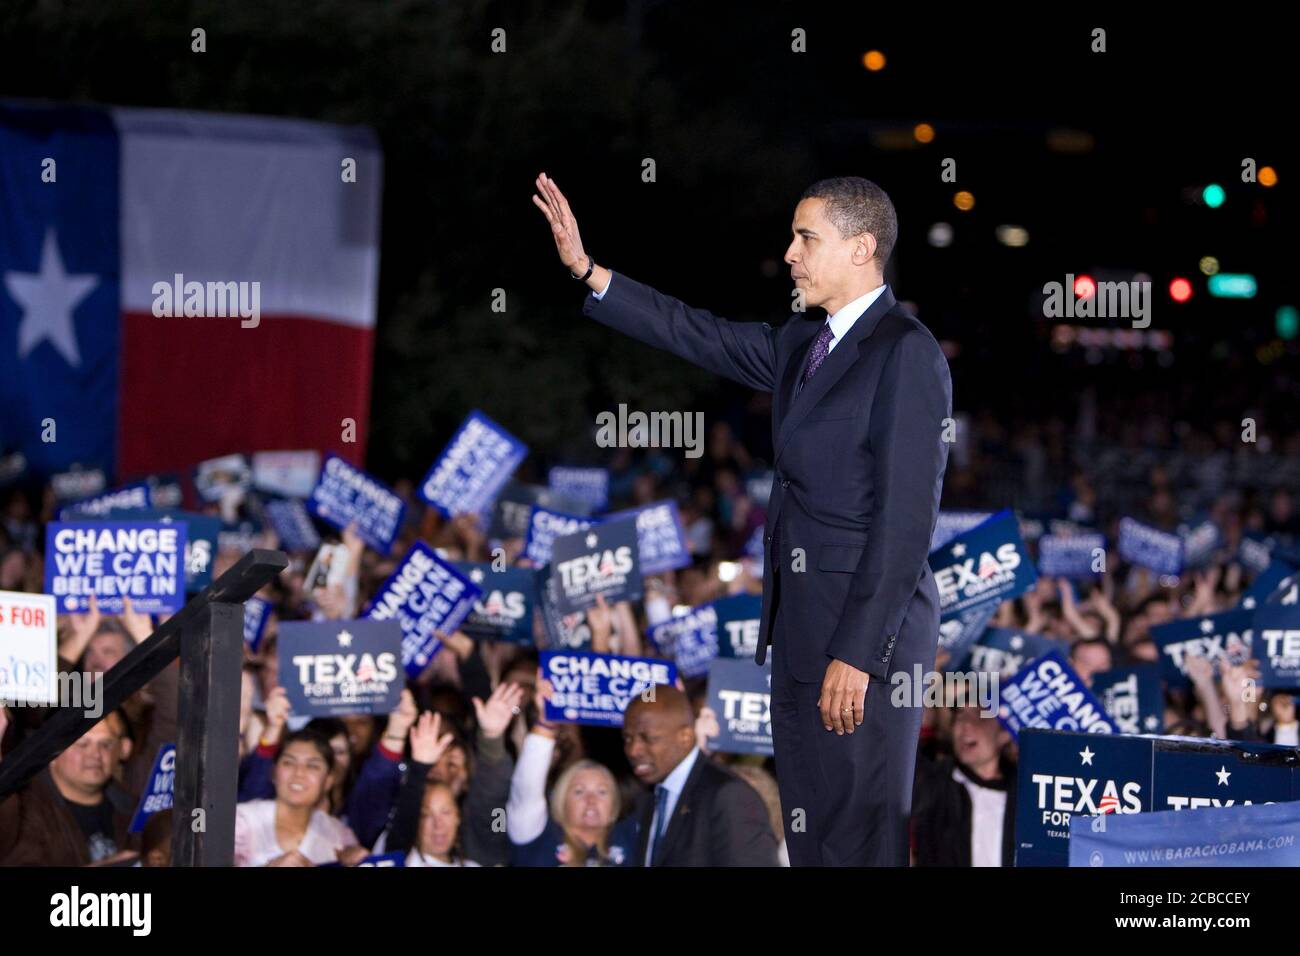 Austin, Texas USA, February 22, 2008: Democratic presidential hopeful Barack Obama speaks to a crowd of about 15,000 during a night-time rally in front of the Texas Capitol in downtown. ©Bob Daemmrich Stock Photo